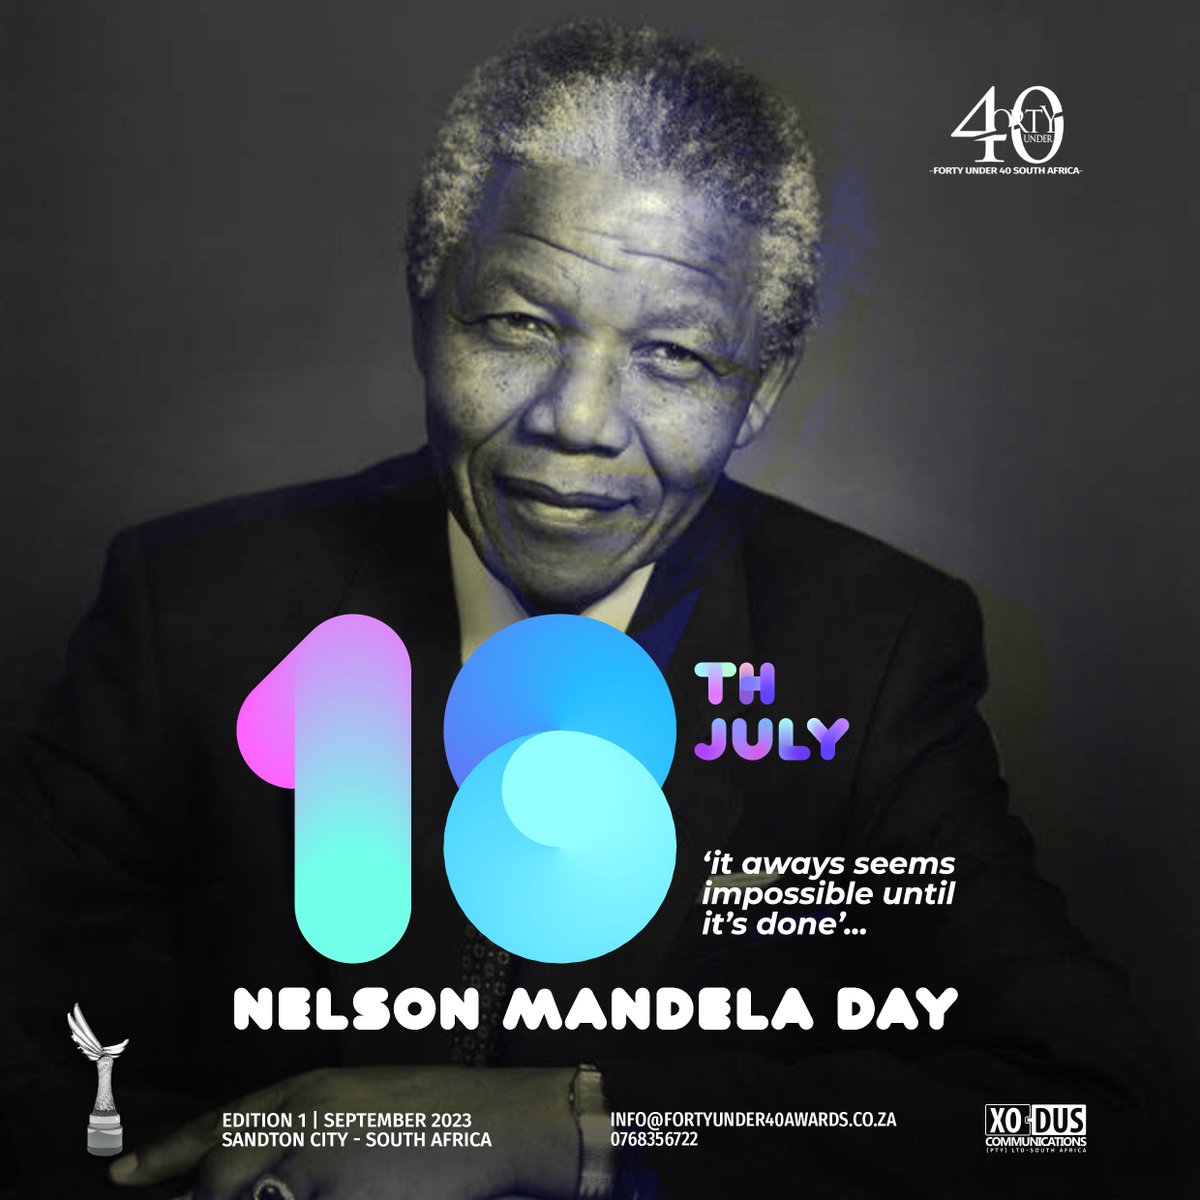 Remembering a true leader on Nelson Mandela Day.
Embrace equality, inspire change, and let kindness guide our actions. 🌍🤝 

#NelsonMandelaDay #LegacyOfLeadership